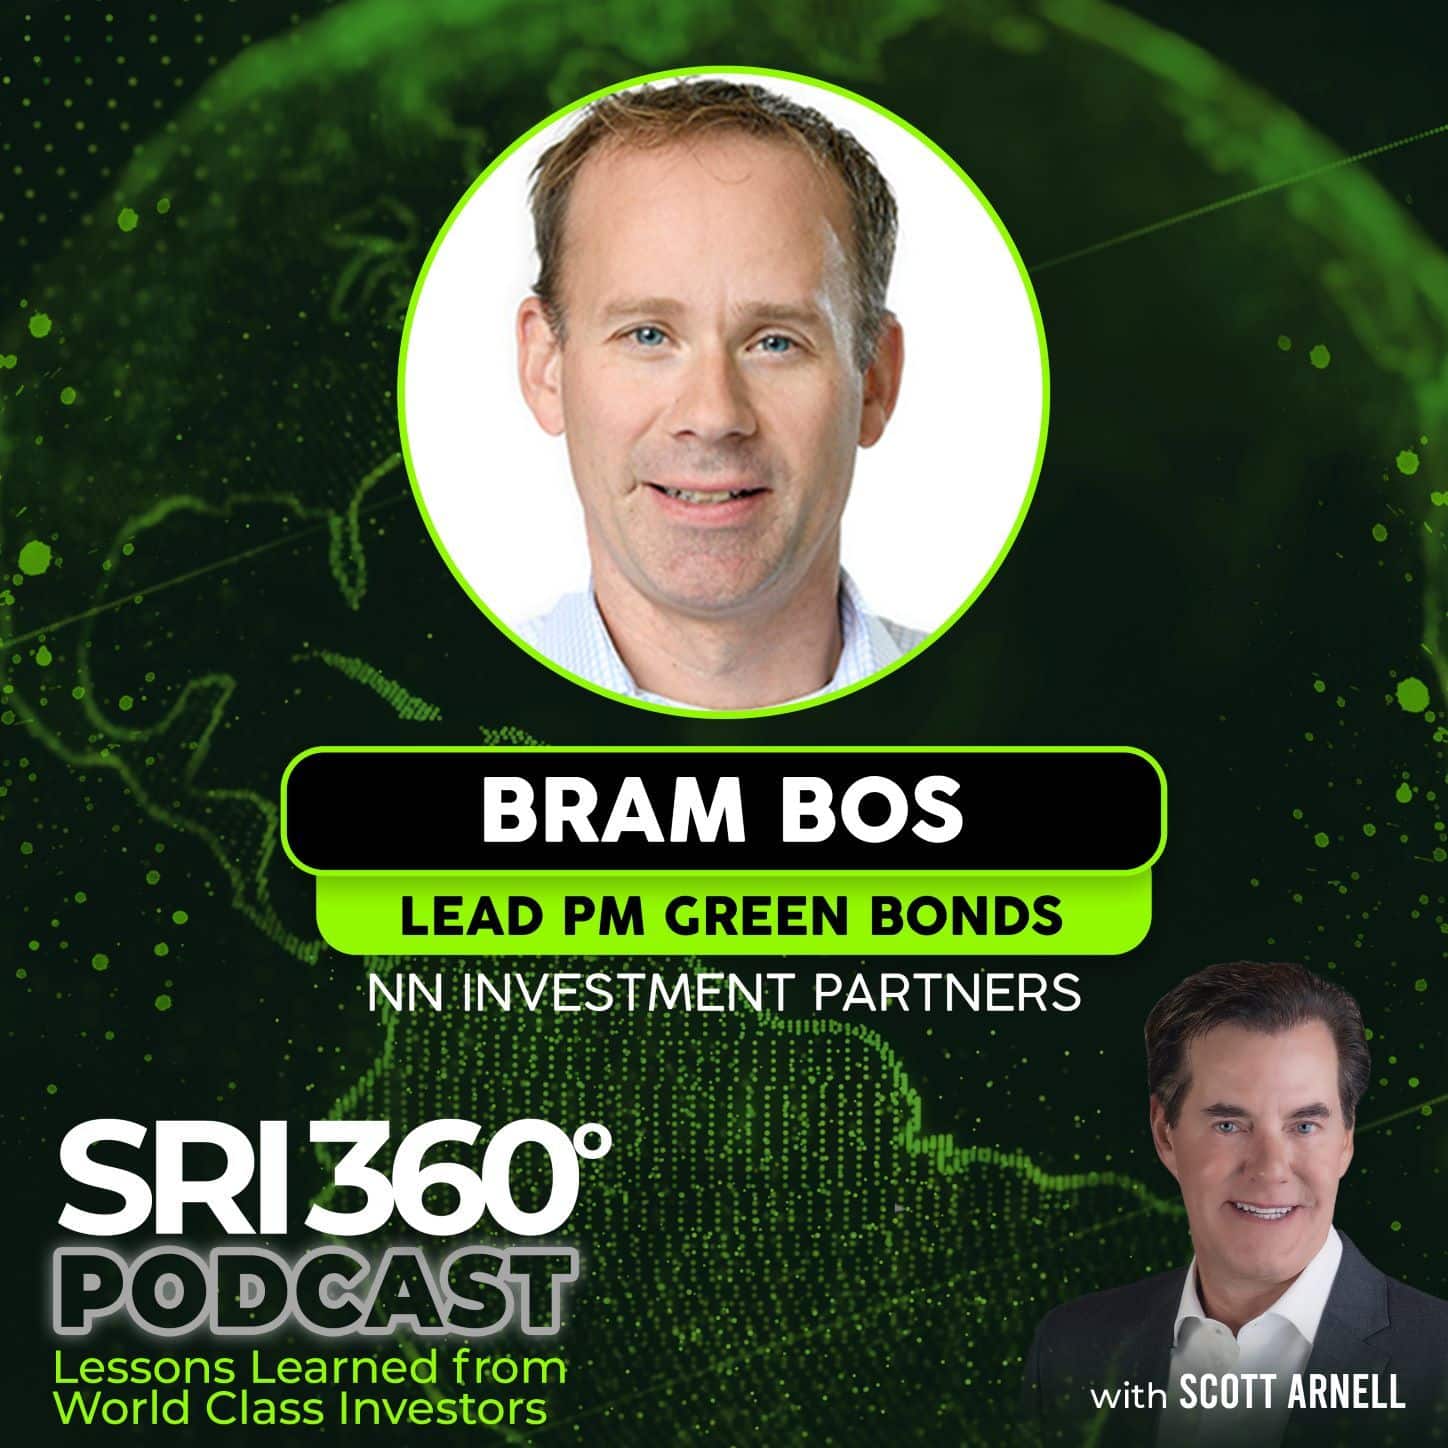 NN Investment Partners Lead PM Green Bonds, Bram Bos on What Makes ...